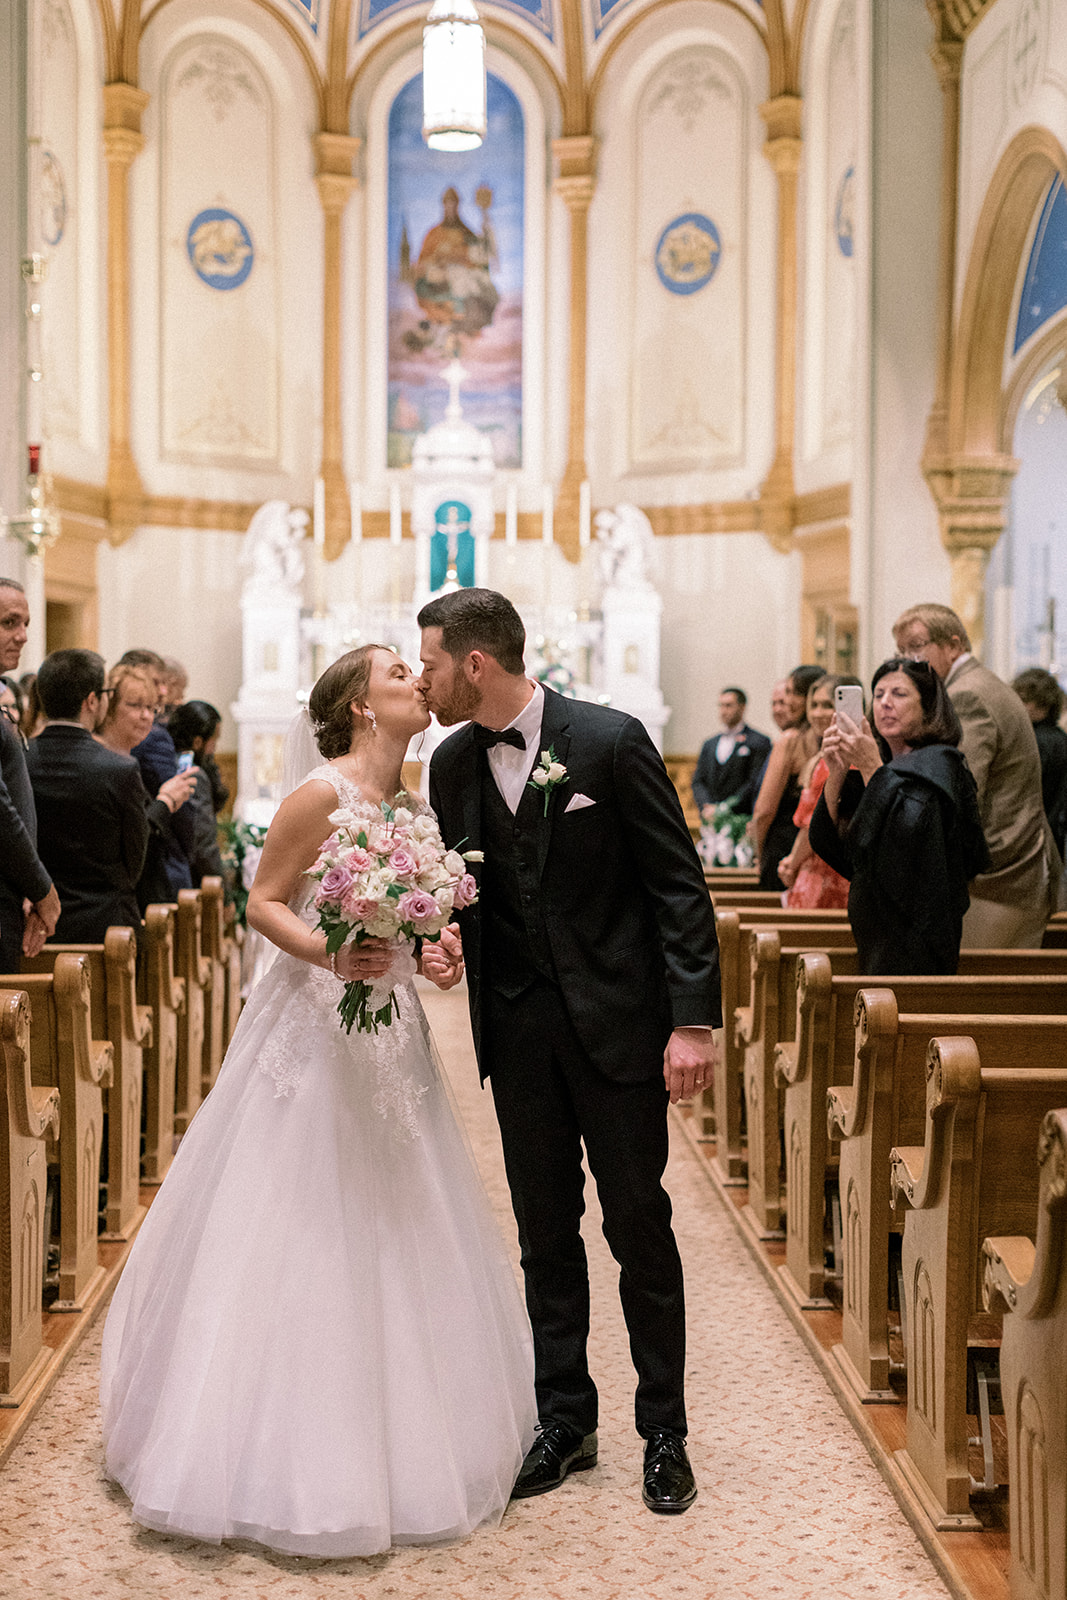 Pennsylvania wedding photographer captures bride and groom walking out of ceremony kissing as newly married couple